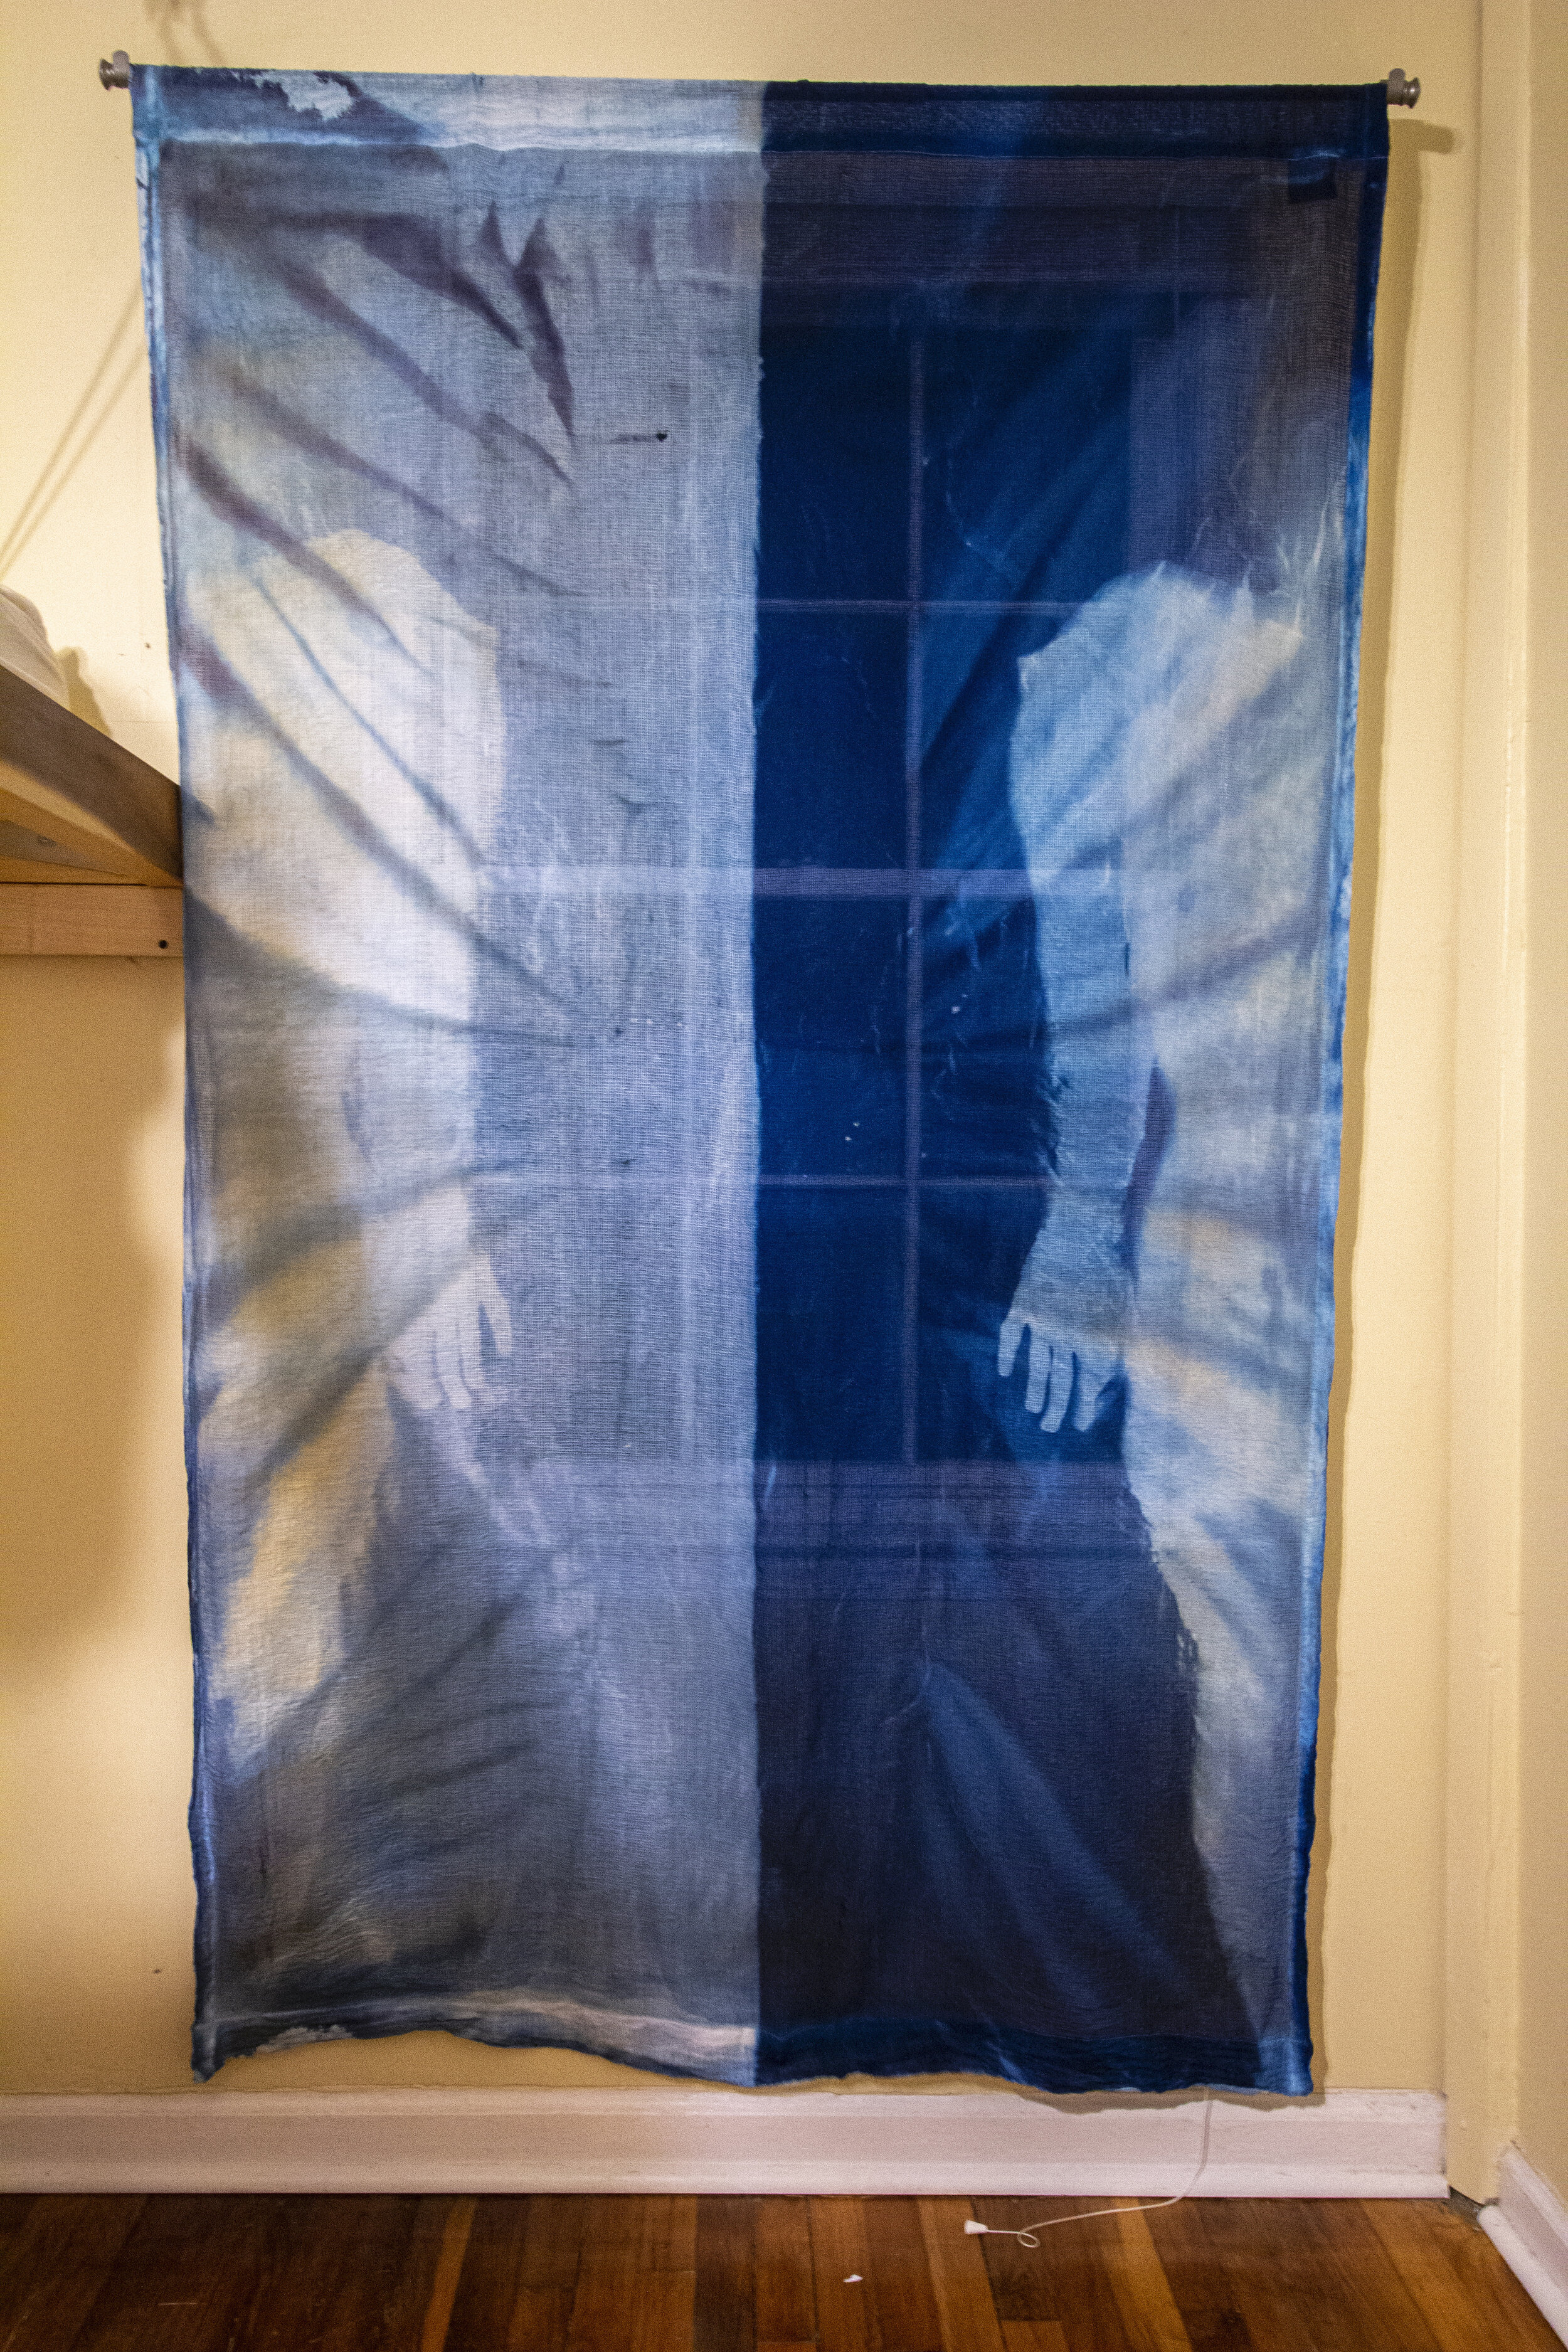 Mirror Image [night], 2020, cotton curtain, cyanotype solution, curtain rod, and hardware, 55 x 84 inches